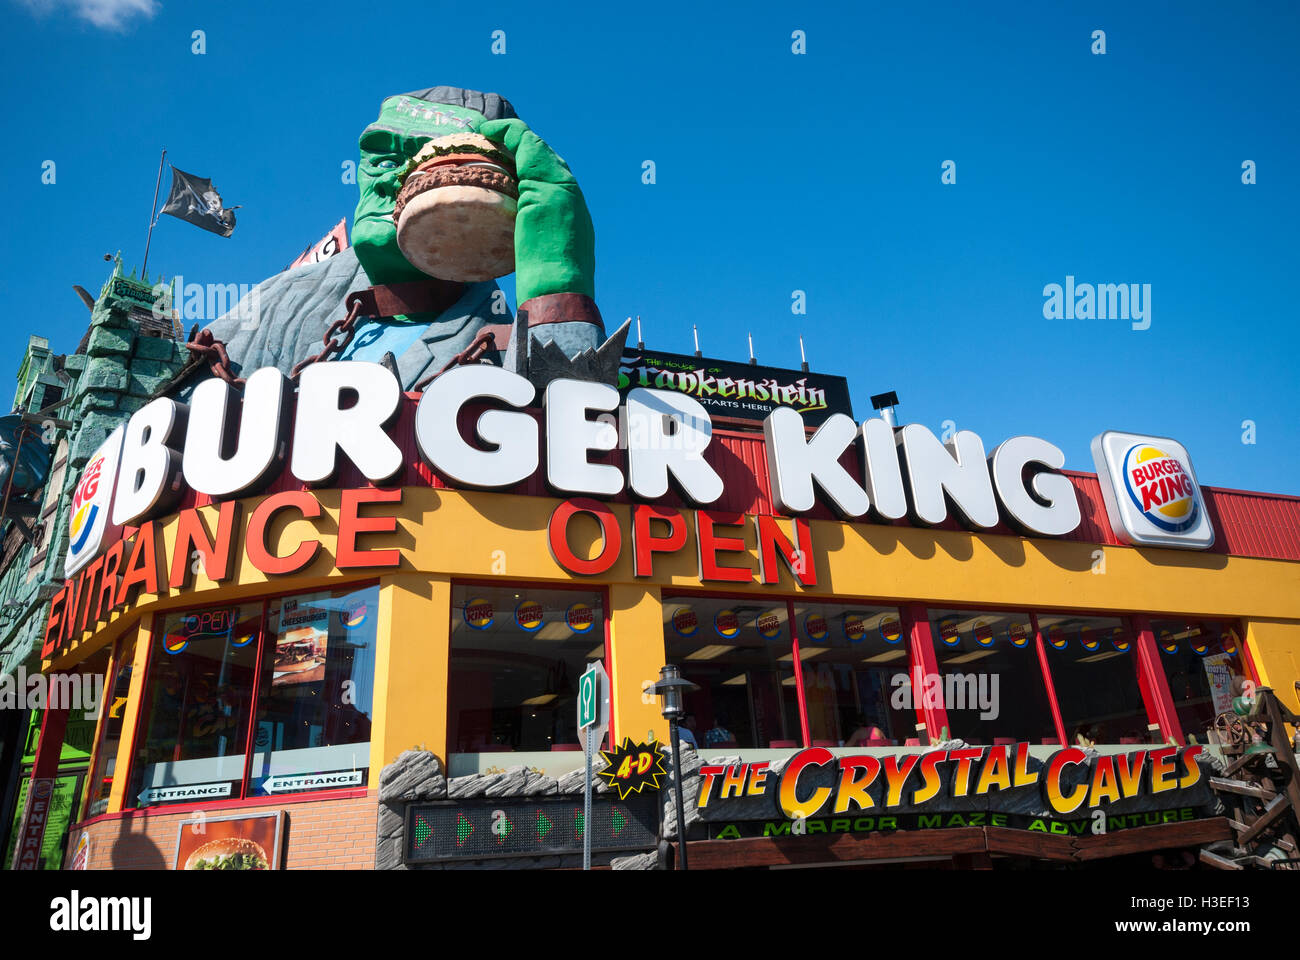 A bizarre Burger King restaurant franchise with Frankenstein holding a burger on Clifton Hill in Niagara Falls Canada Stock Photo